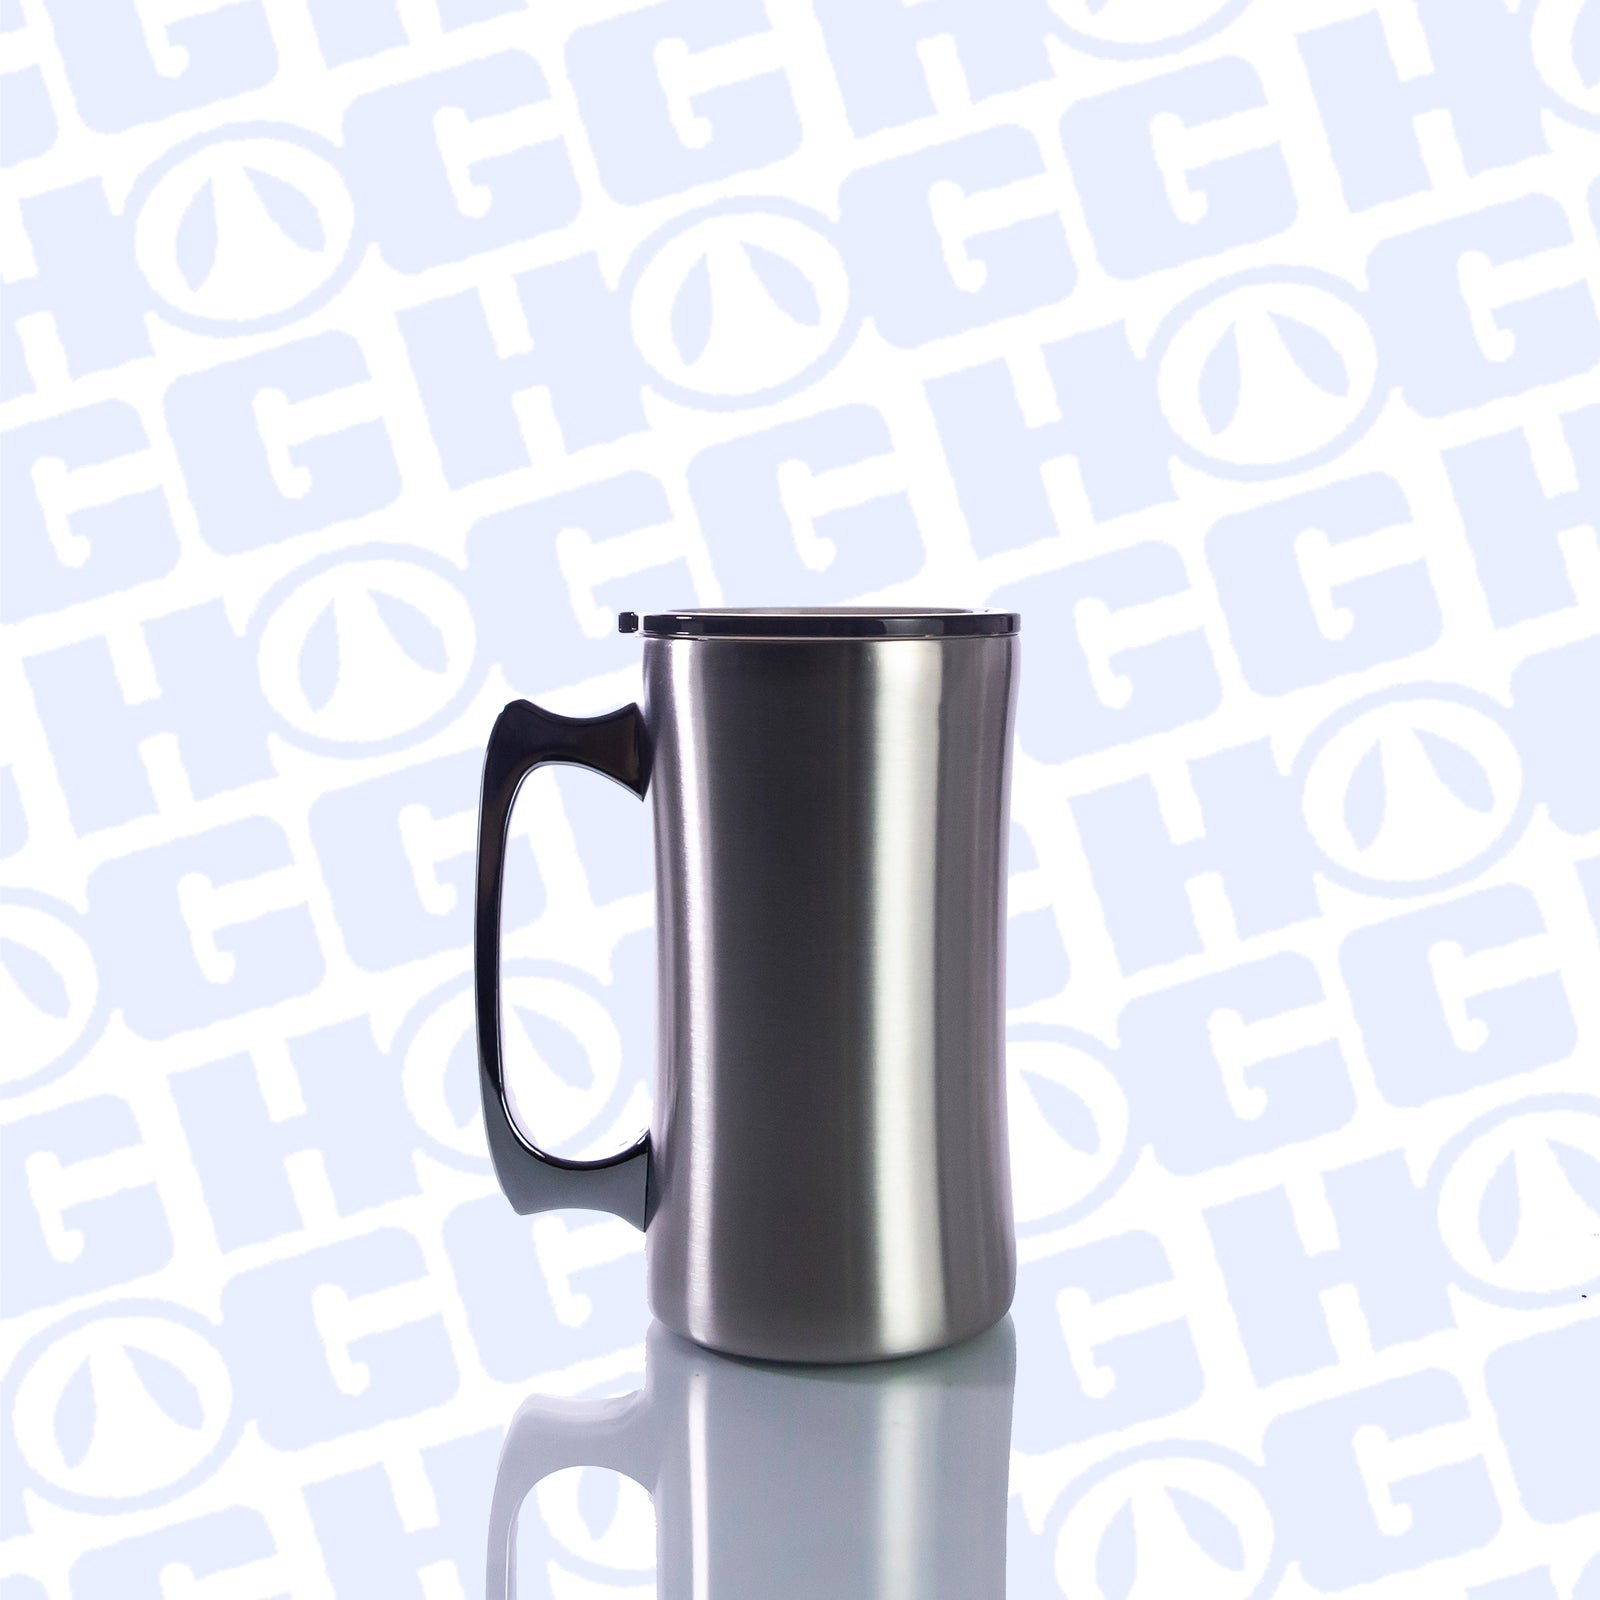 20 OZ Reusable Aluminum Beer Mug Cups - JR312 - IdeaStage Promotional  Products